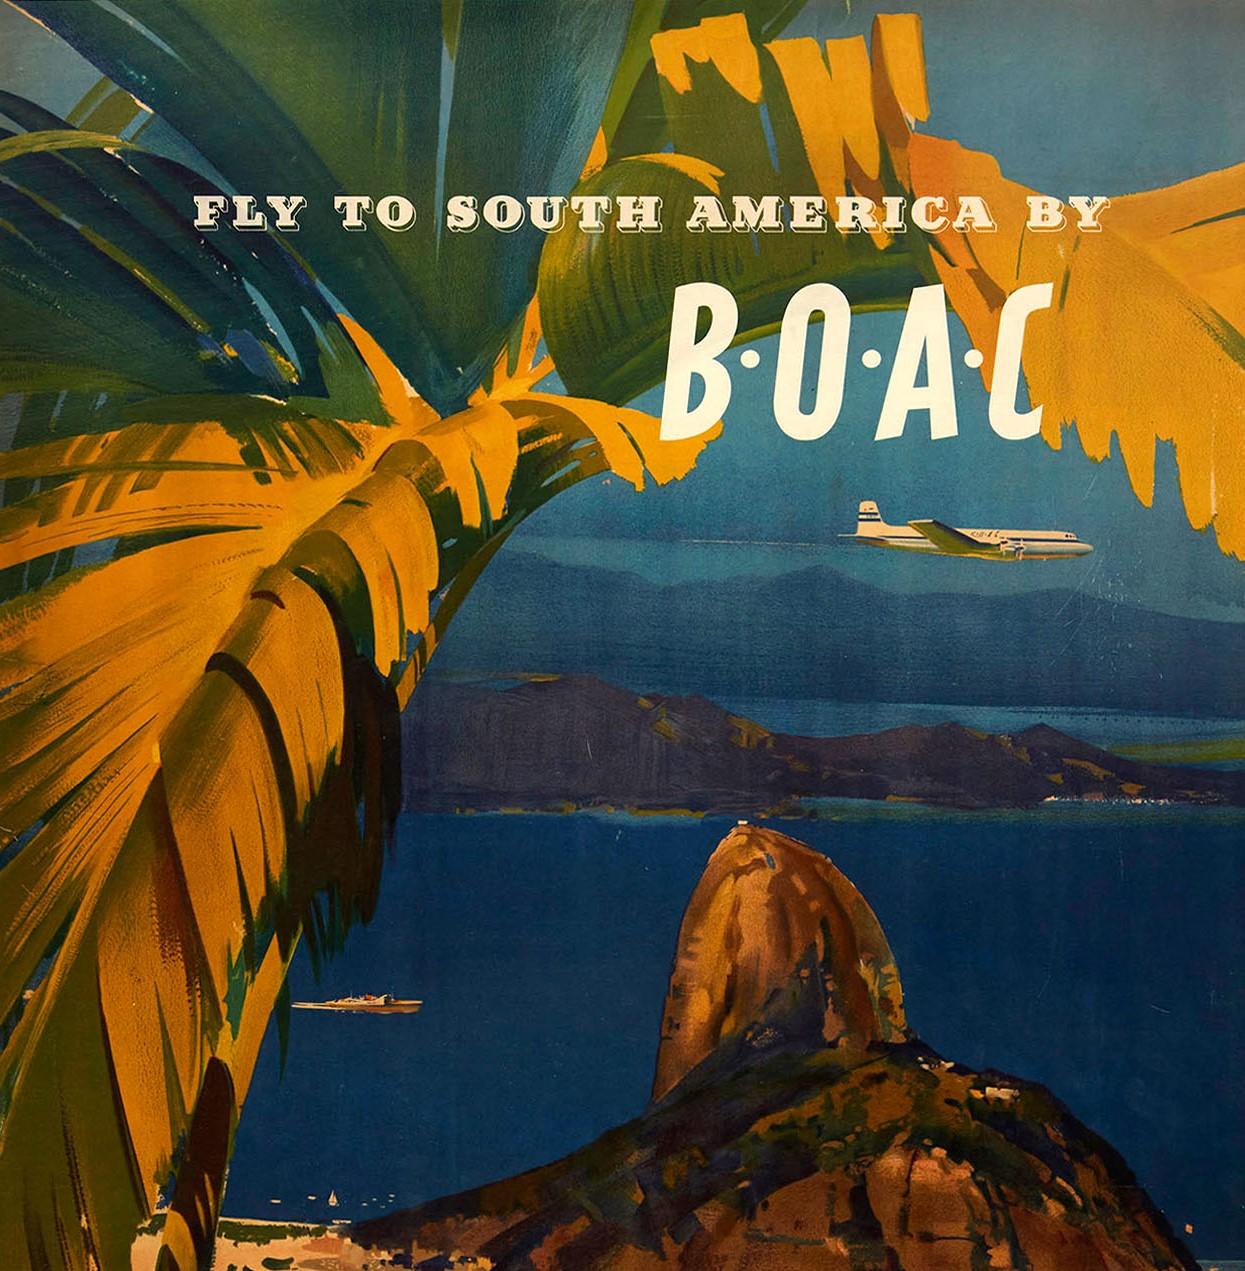 Original Vintage Poster Fly To South America By BOAC Airline Travel Rio Brazil  - Print by Frank Wootton